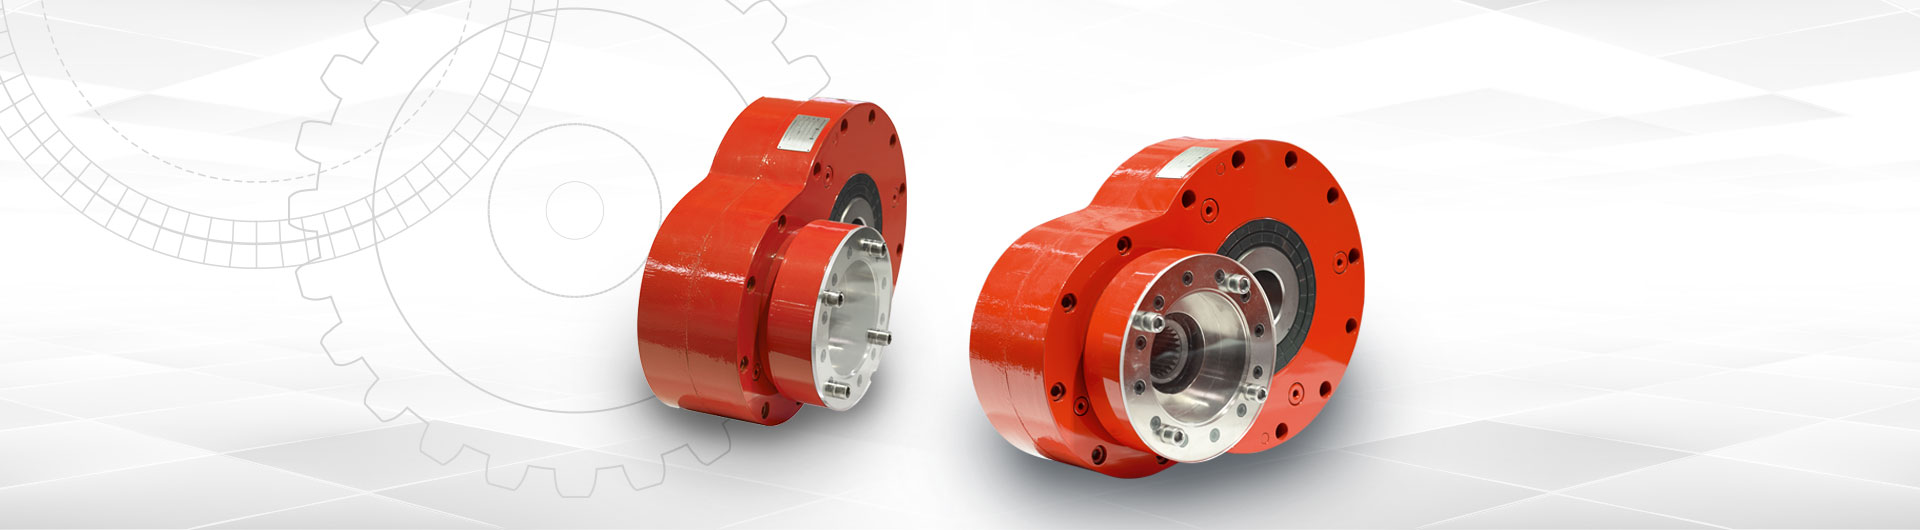 Parallel shaft gearboxes